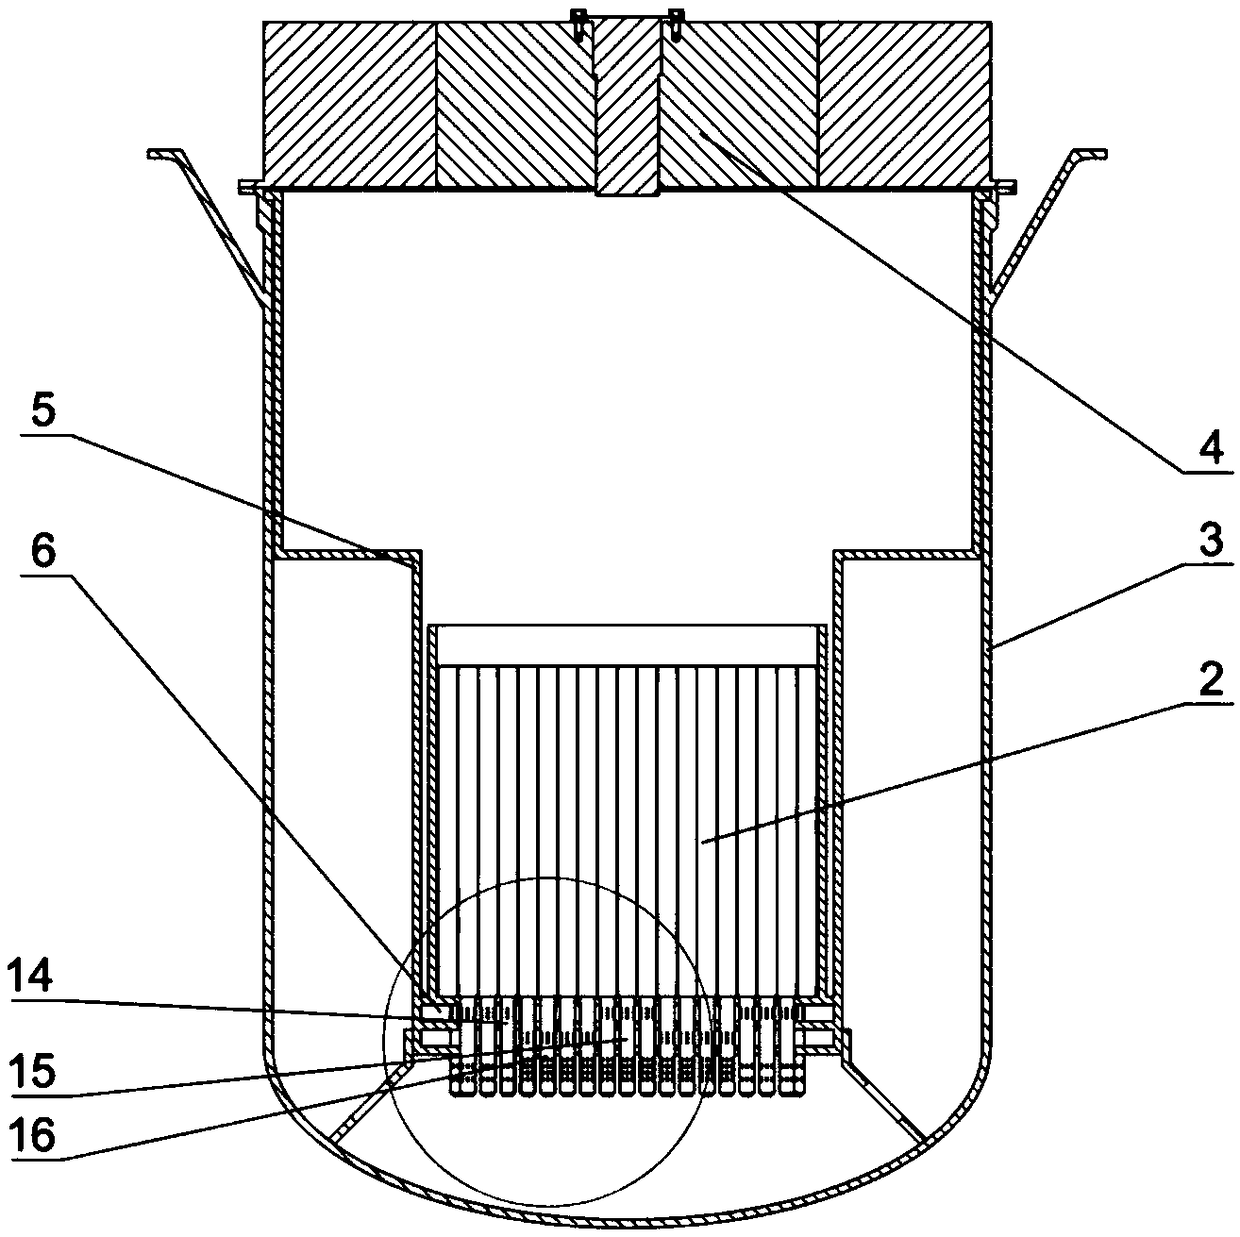 A compact nuclear reactor with multi-mode operation